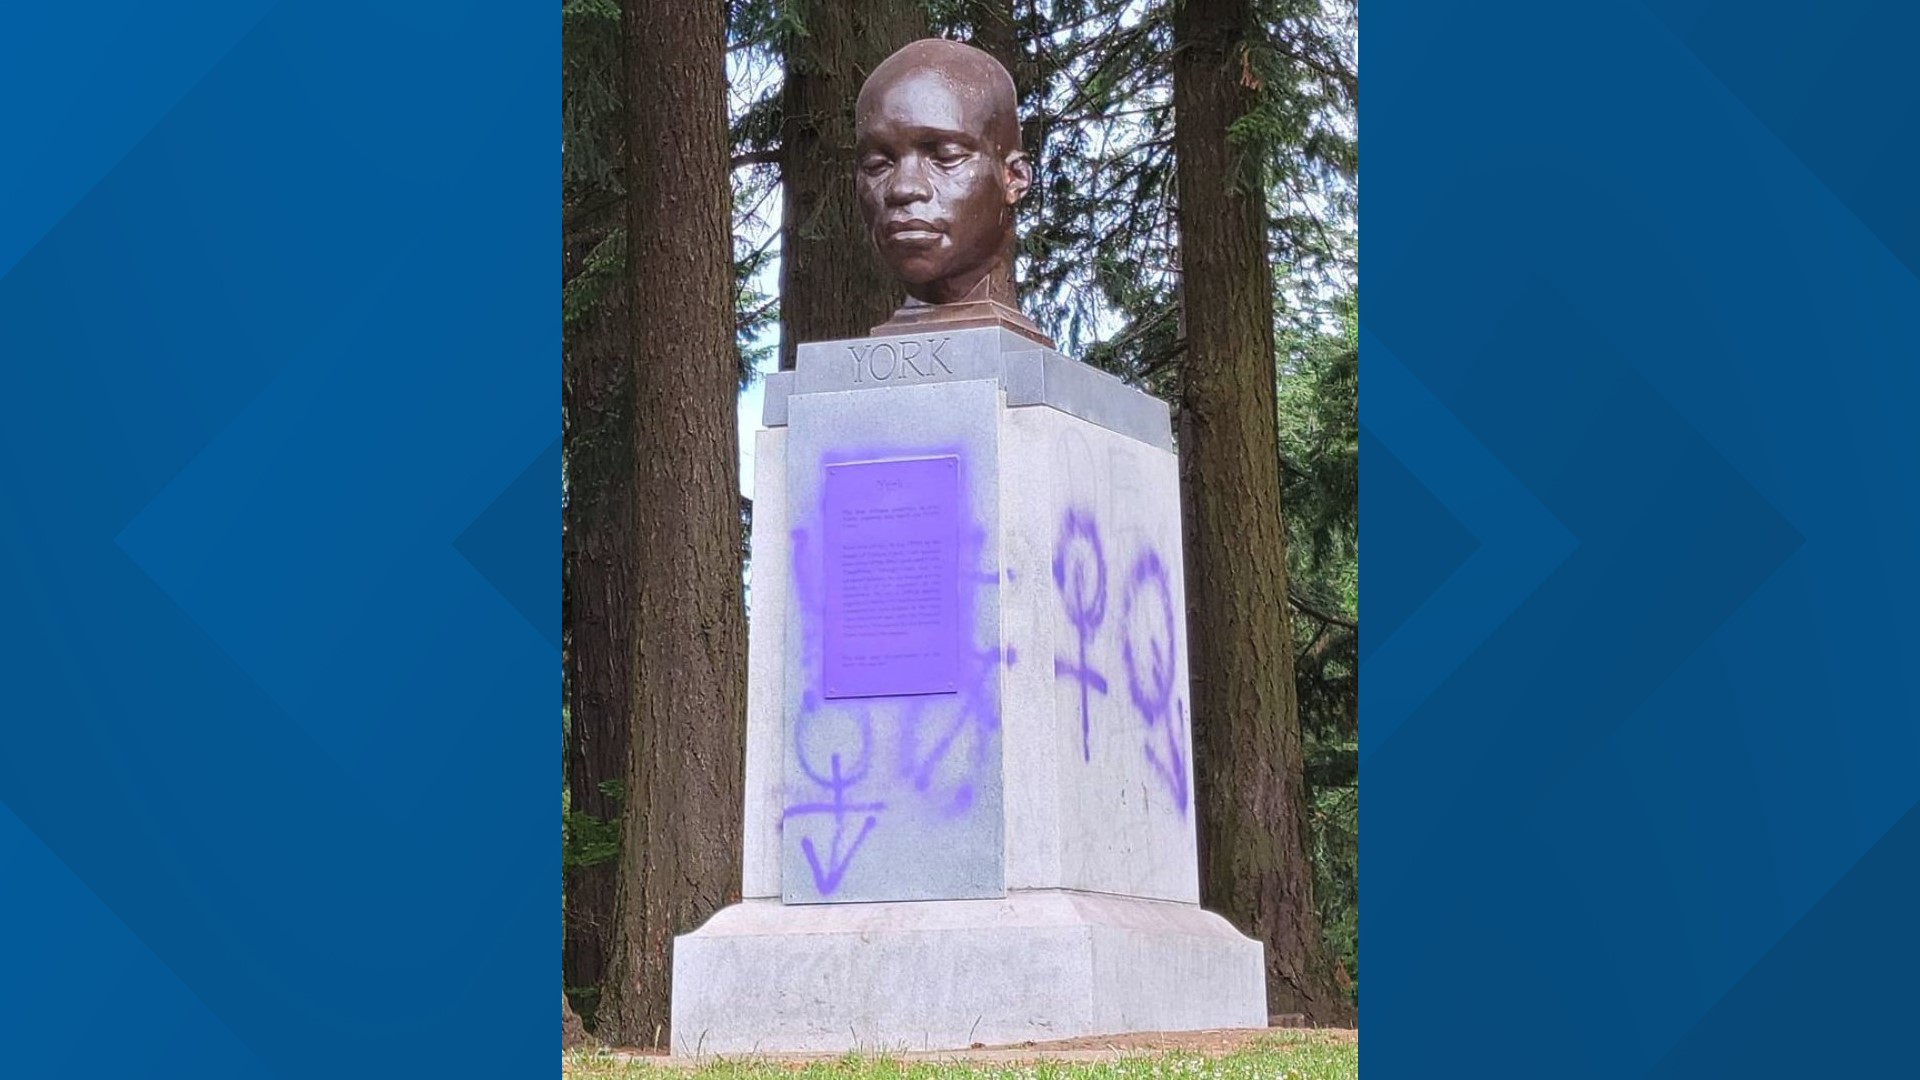 Videos shared with KGW show a woman with cans of spray paint vandalizing the statue of York, the only Black member of the Lewis and Clark expedition.